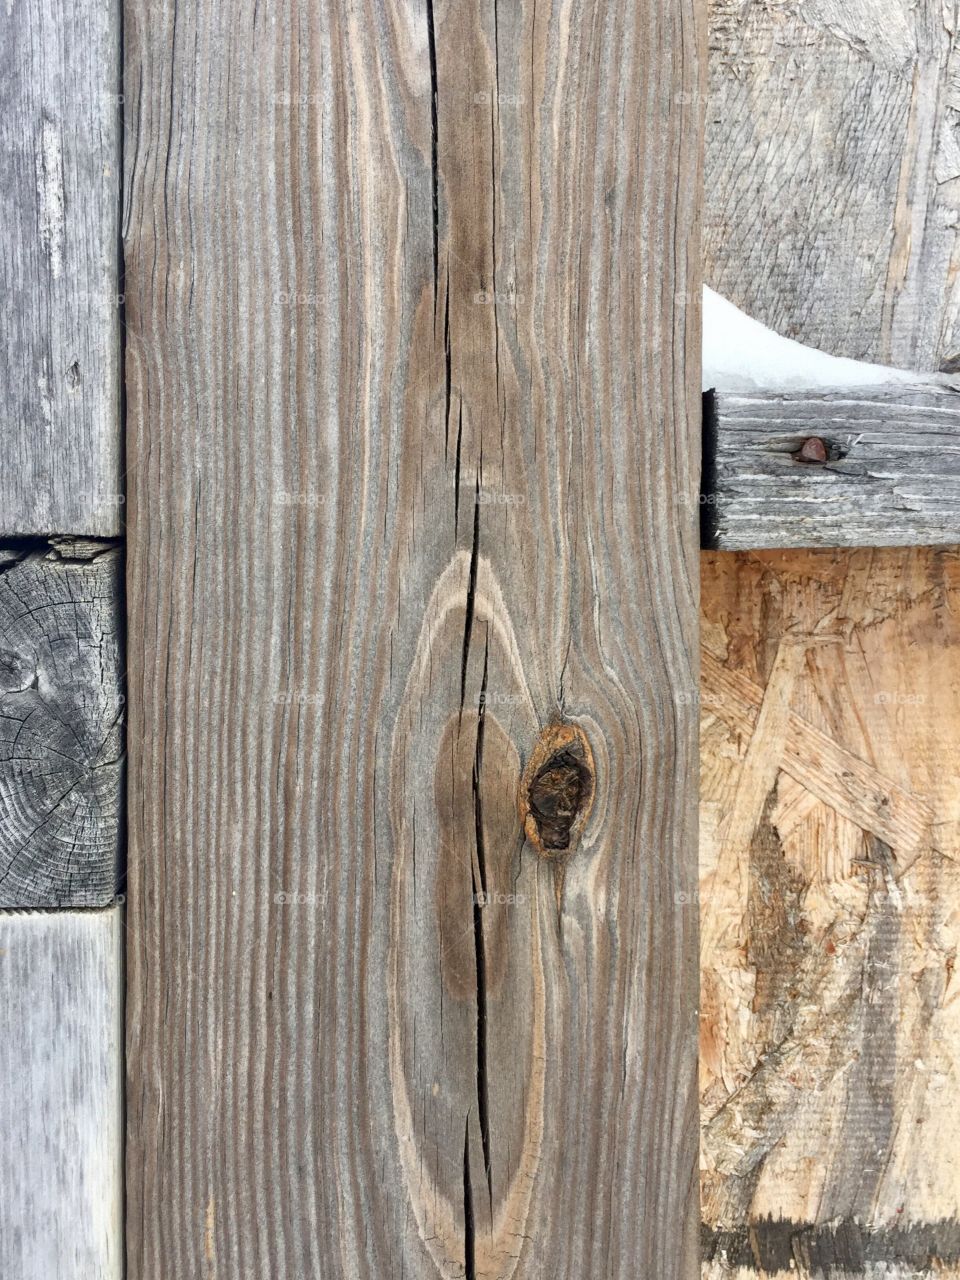 Abstract closeup of various grades of lumber on an outdoor structure in winter